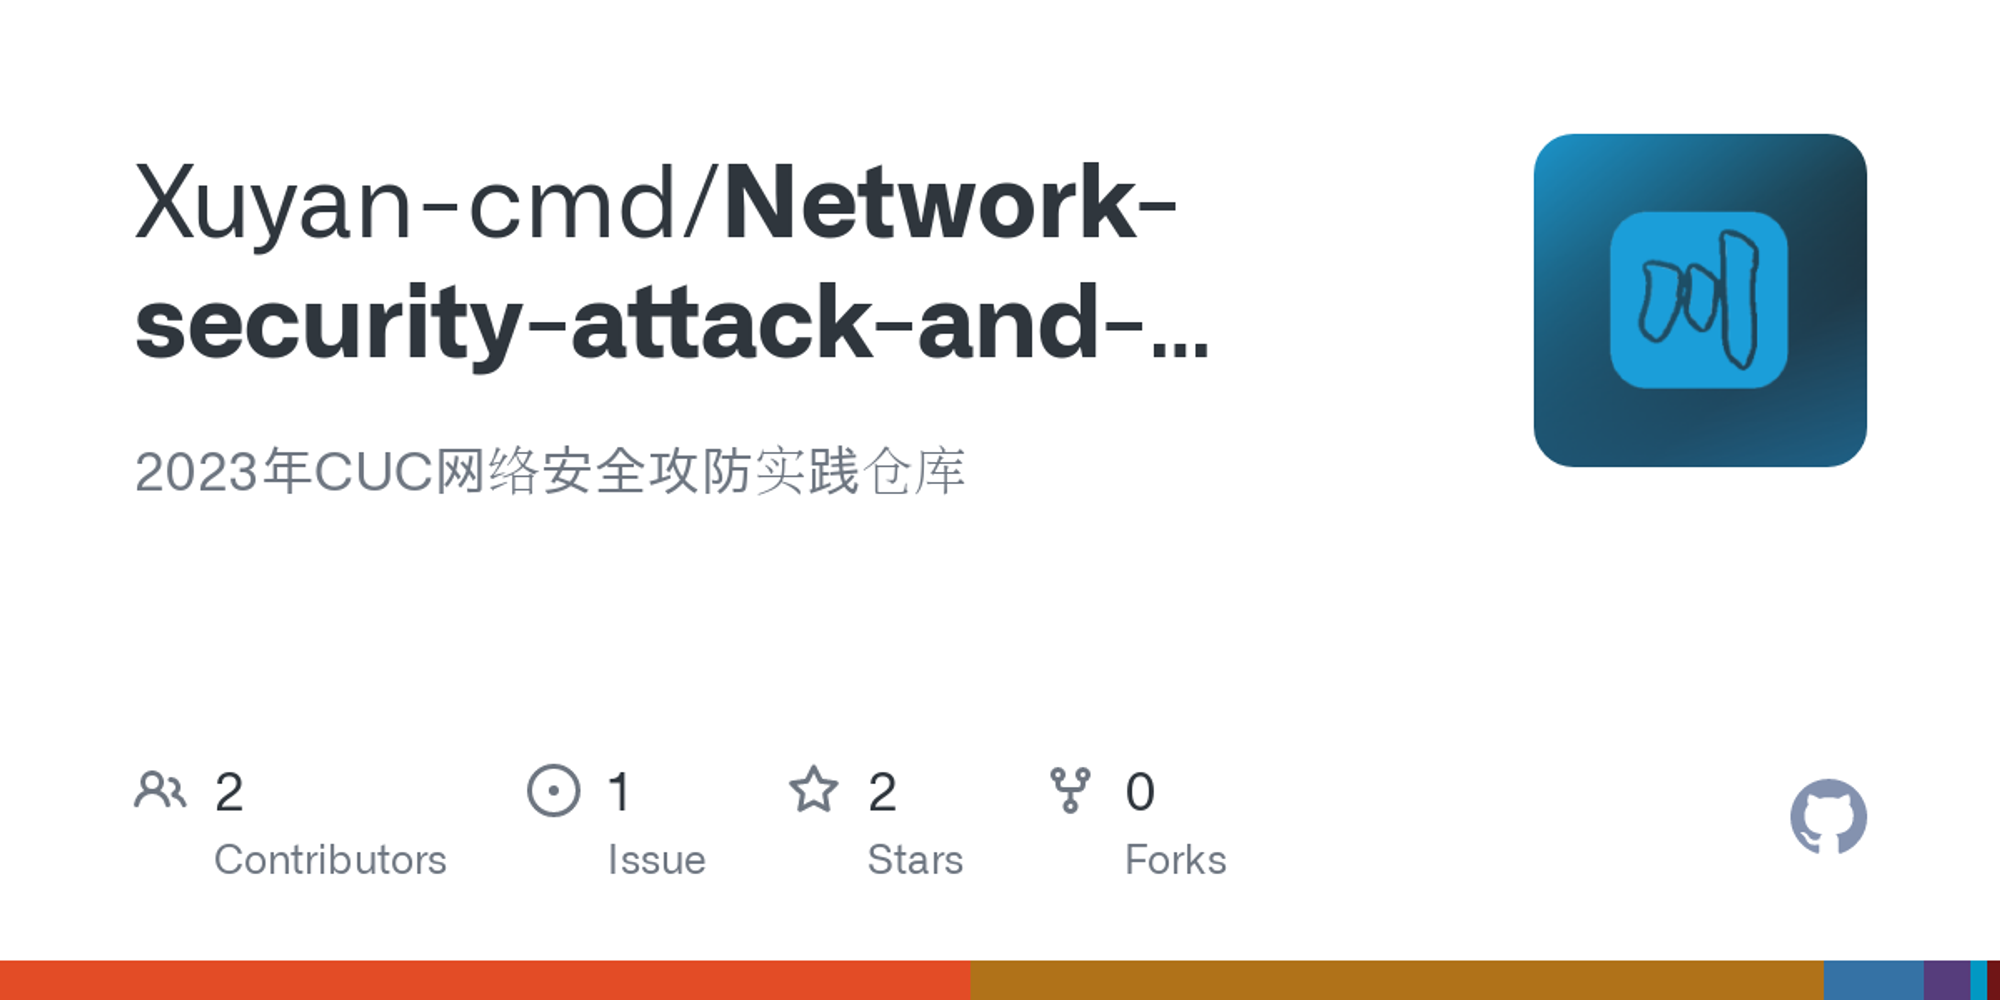 GitHub - Xuyan-cmd/Network-security-attack-and-defense-practice: 2023年CUC网络安全攻防实践仓库